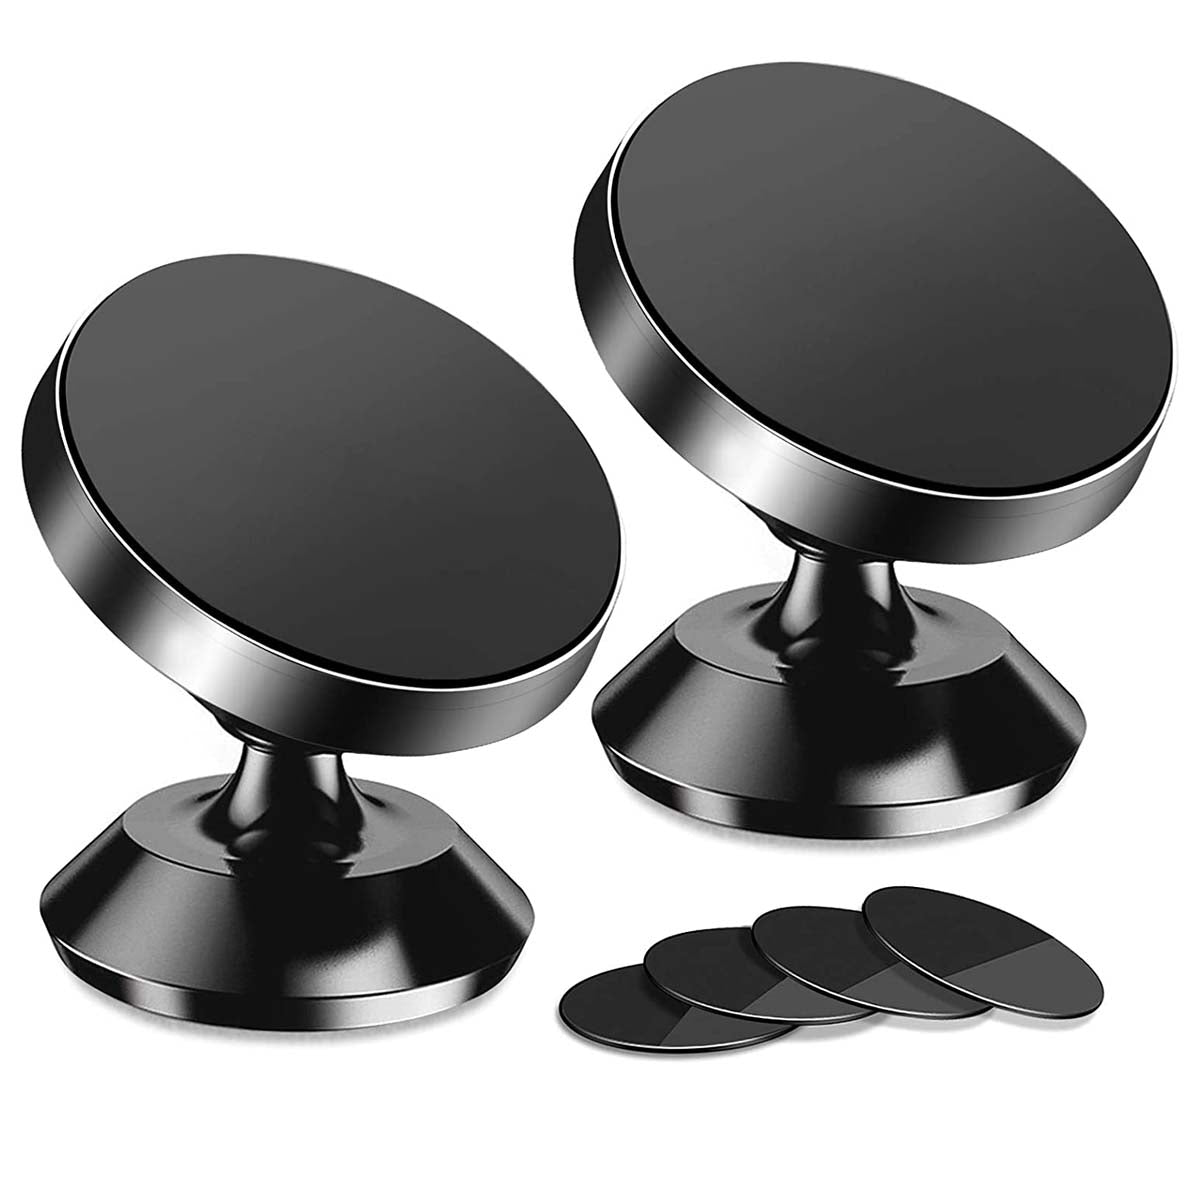 [2 Pack ] Magnetic Phone Mount, Custom For Cars, [ Super Strong Magnet ] [ with 4 Metal Plate ] car Magnetic Phone Holder, [ 360° Rotation ] Universal Dashboard car Mount Fits All Cell Phones, Car Accessories MT13982